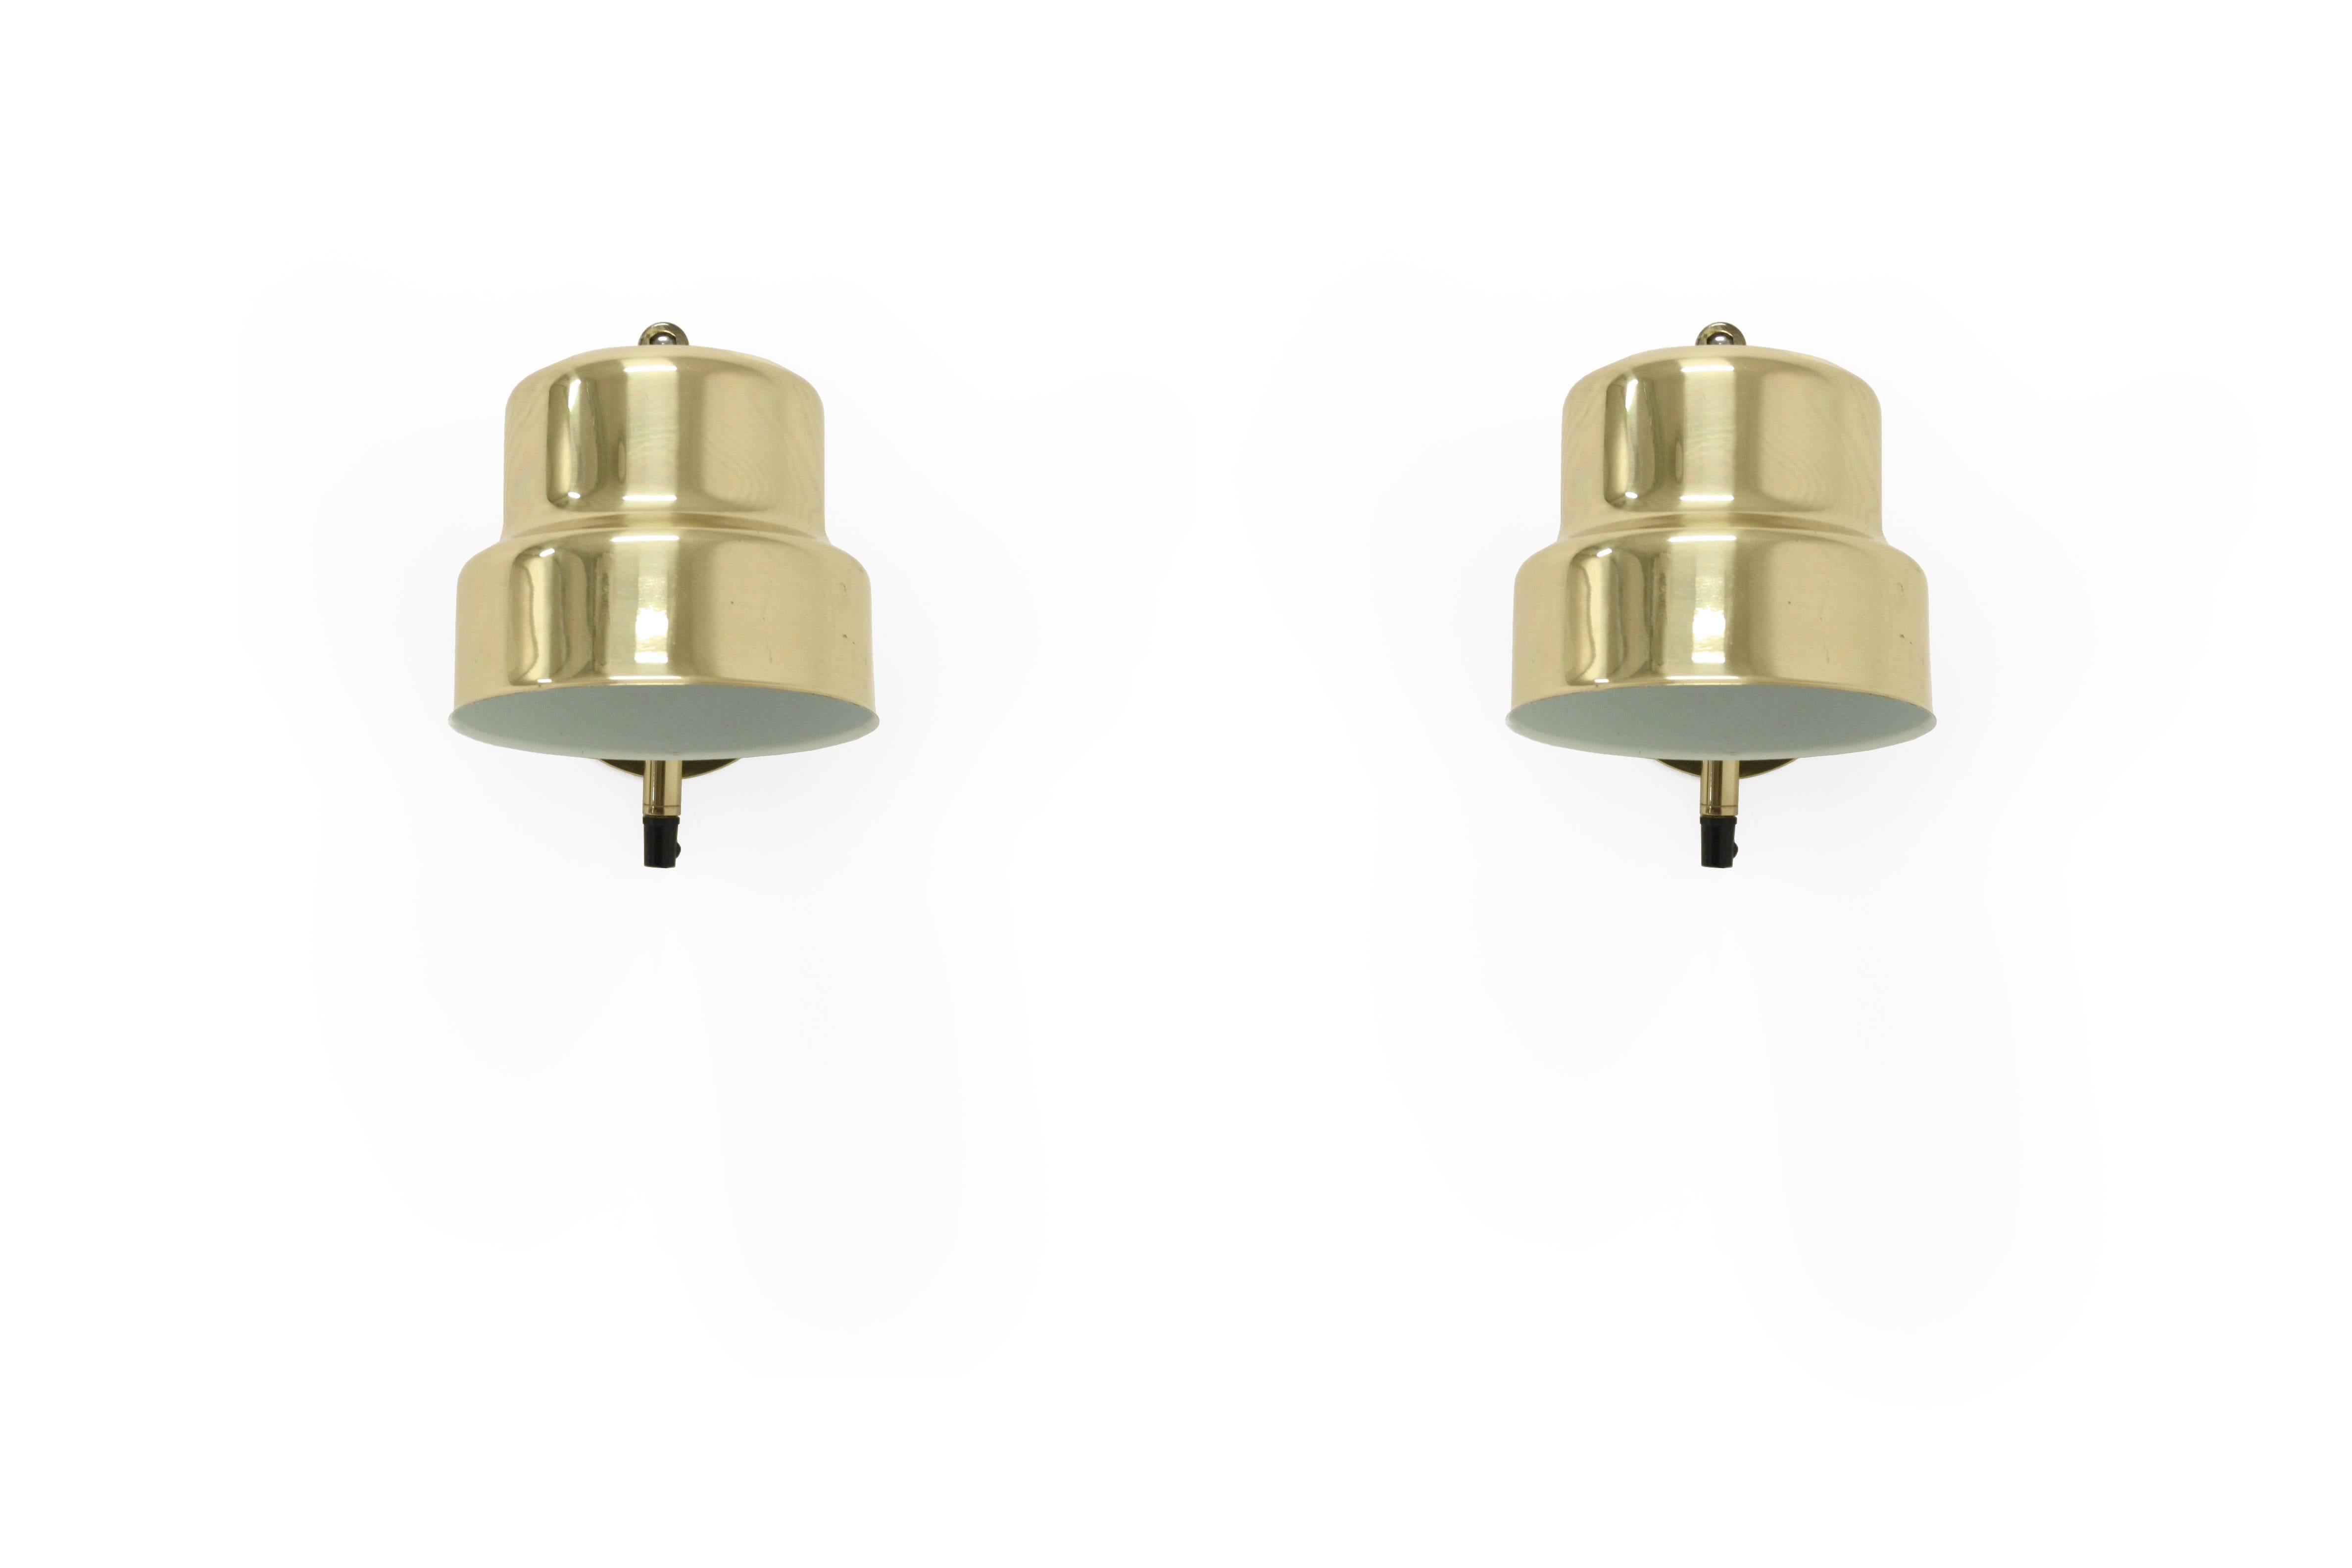 Wonderful pair of wall lights in brass. Designed and made in Denmark by ABO Randers from circa 1970s second half.

Both lamps are fully working and in excellent vintage condition. This lamps have never been used, they are part of a dead stock lot